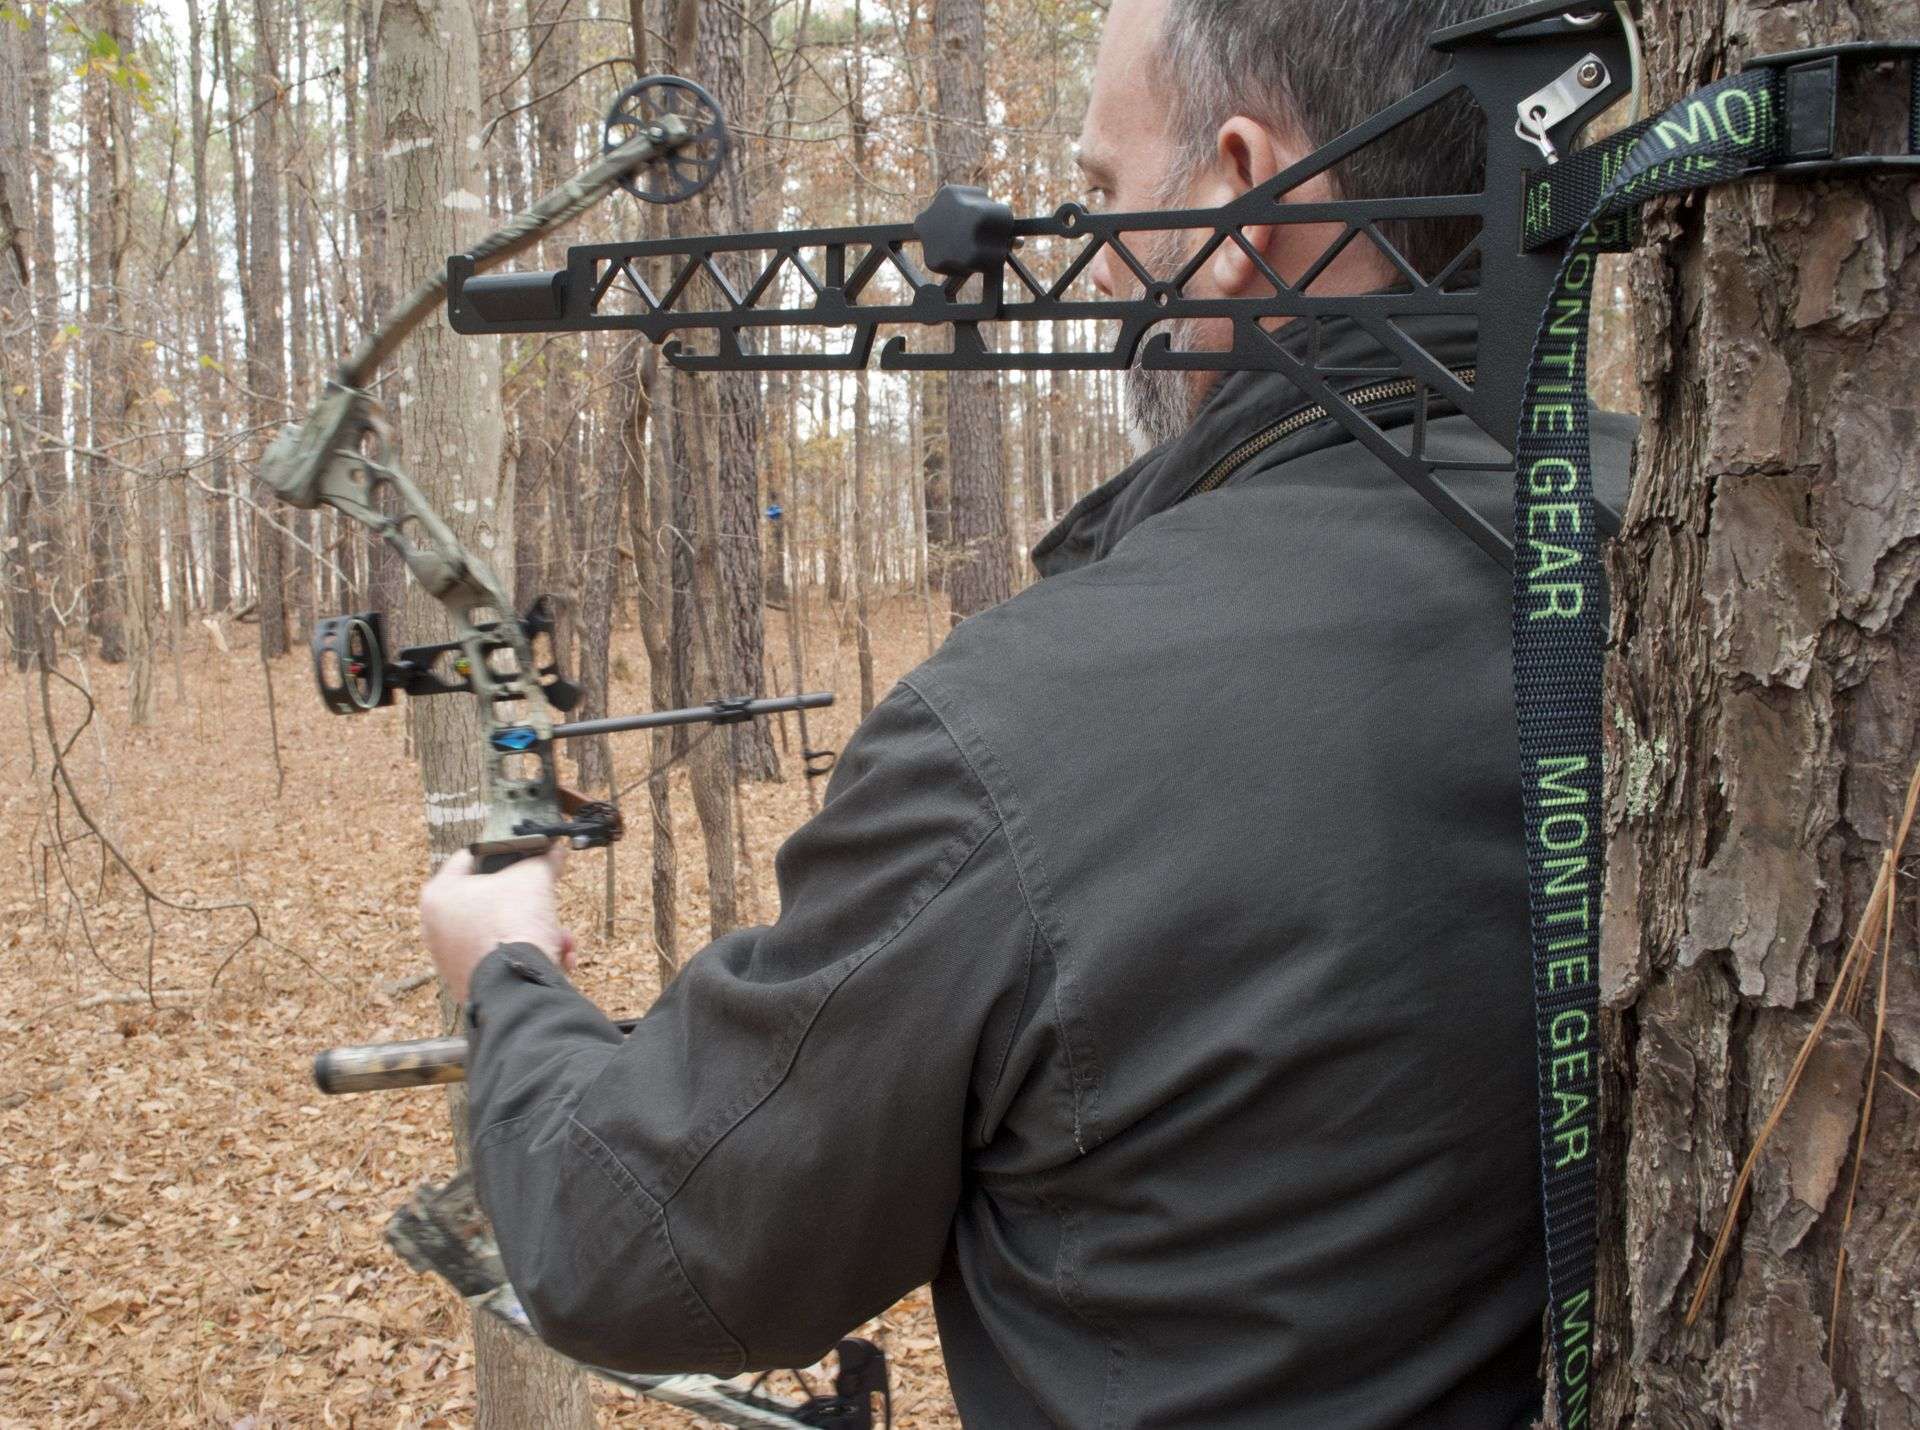 Hunter's Friend - Treestand Aide for Bow Hunting